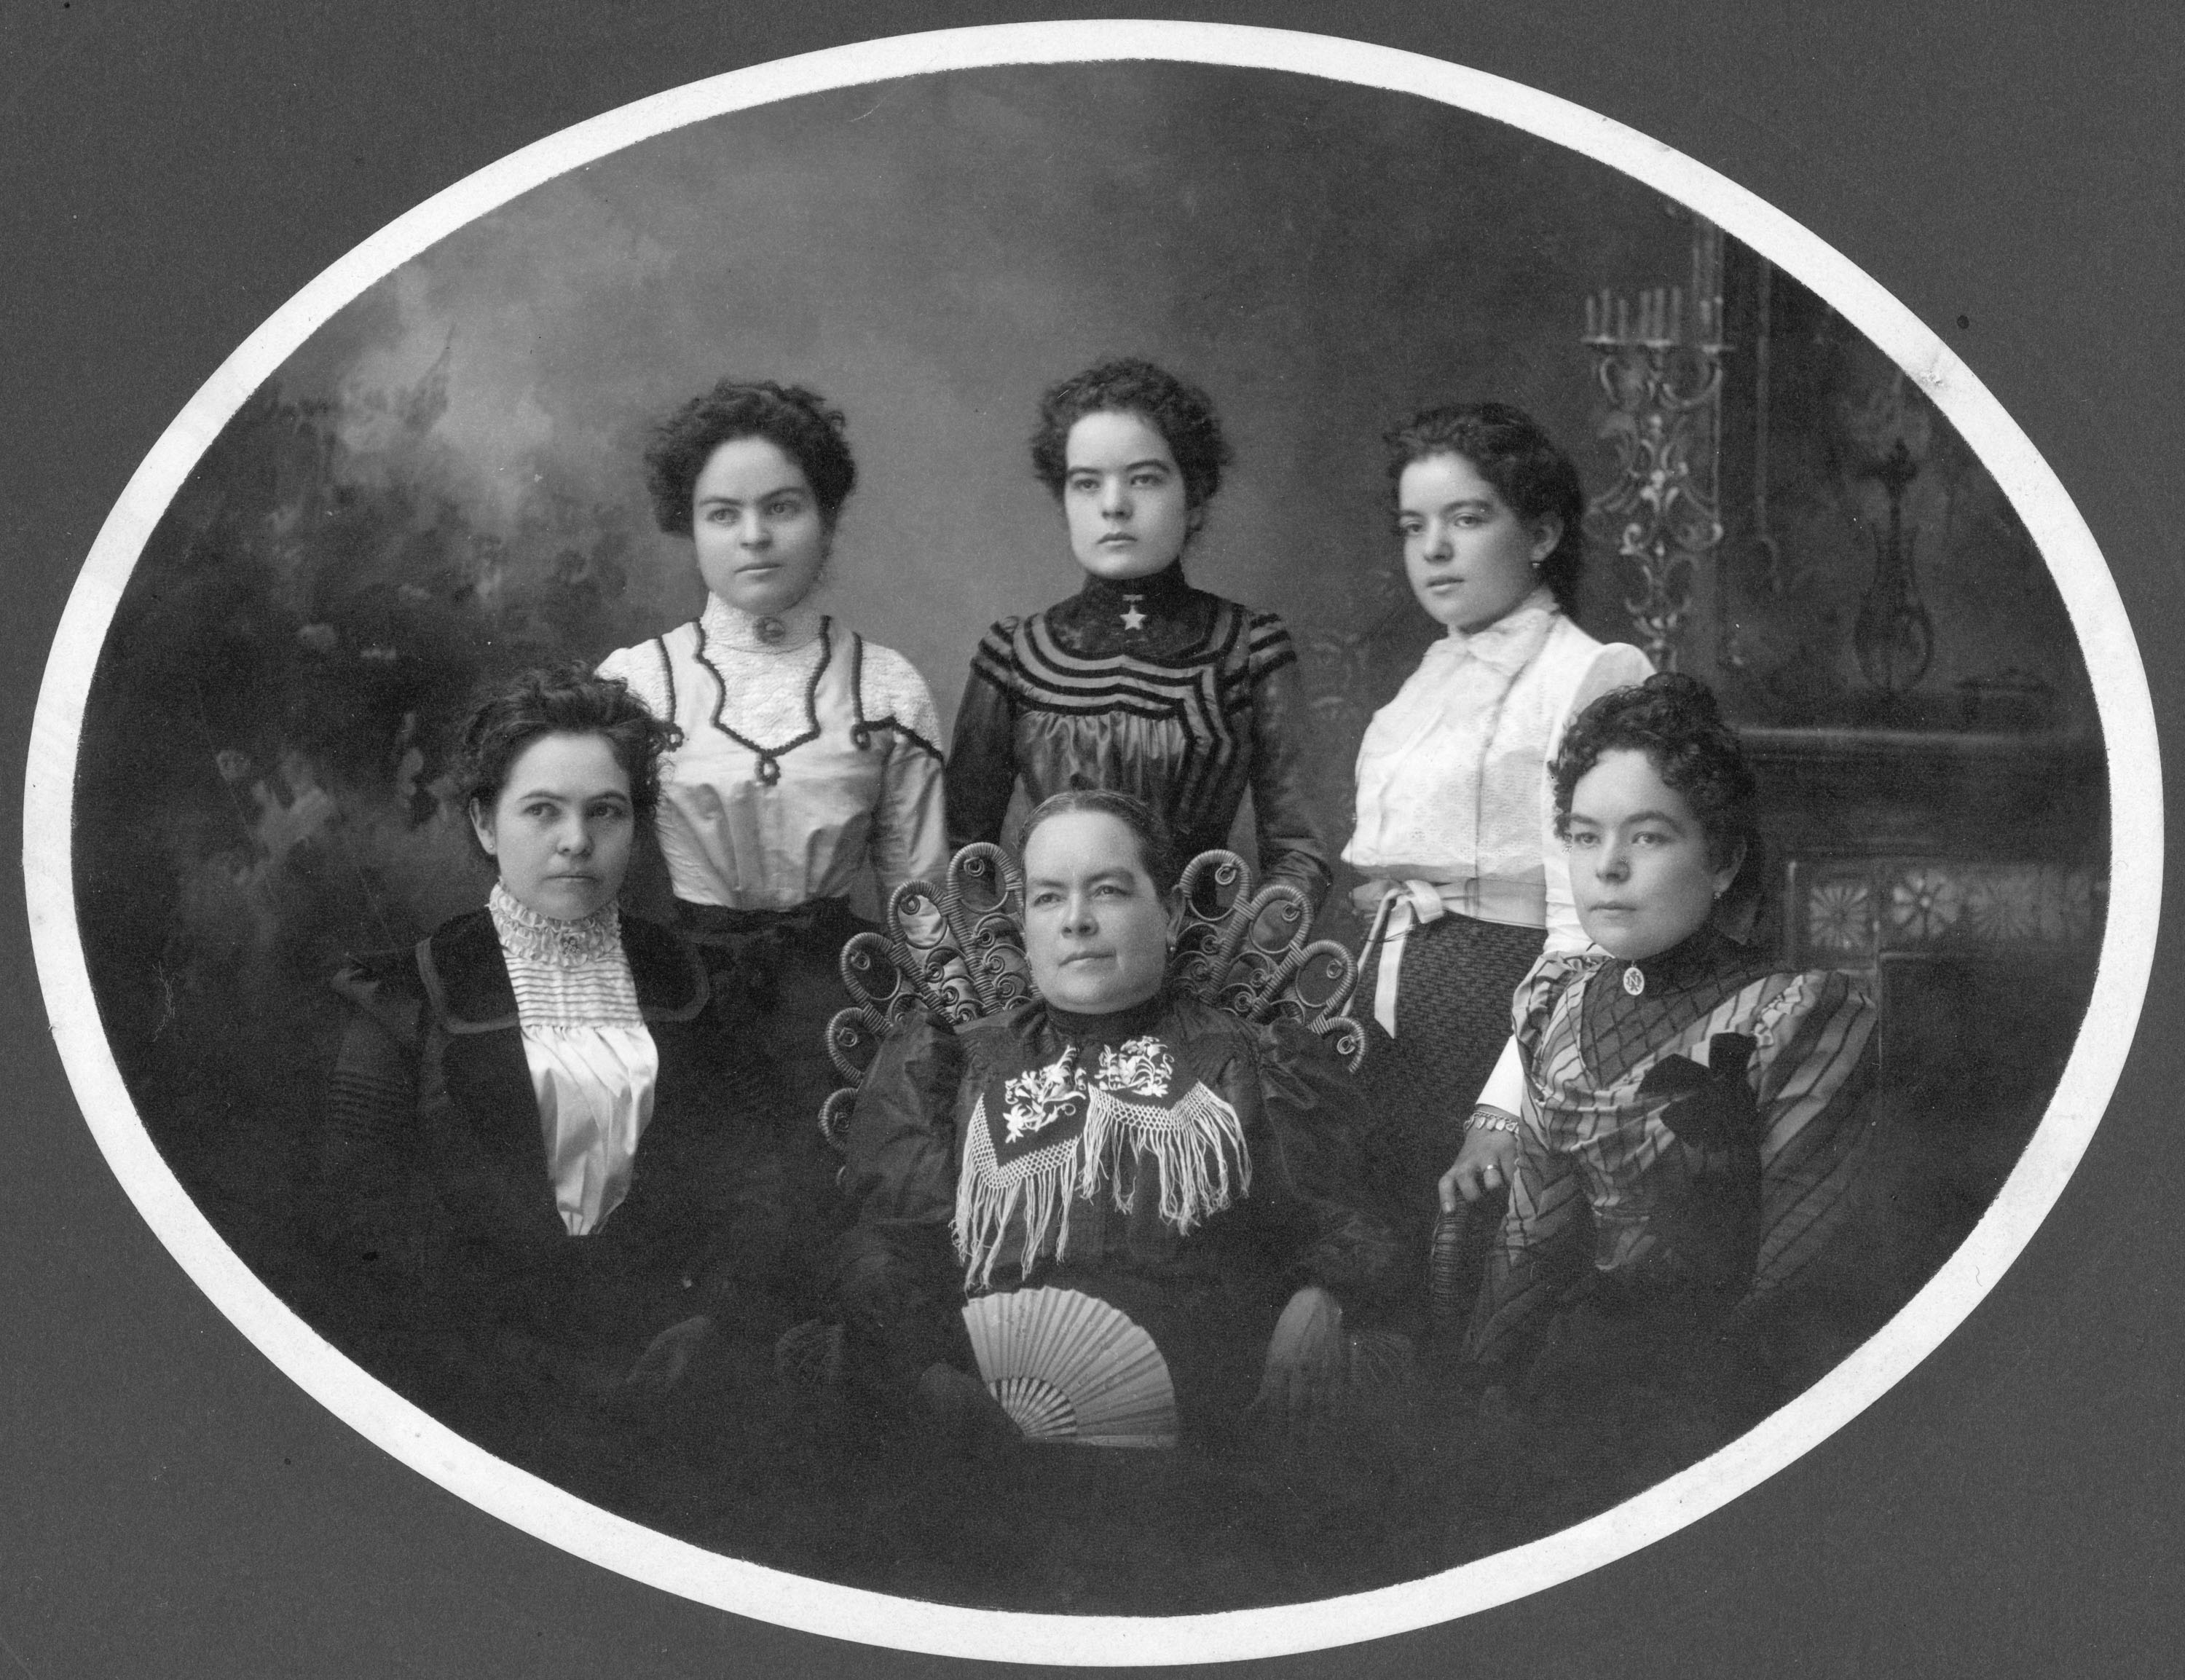 black and white group photograph of the Amador family women